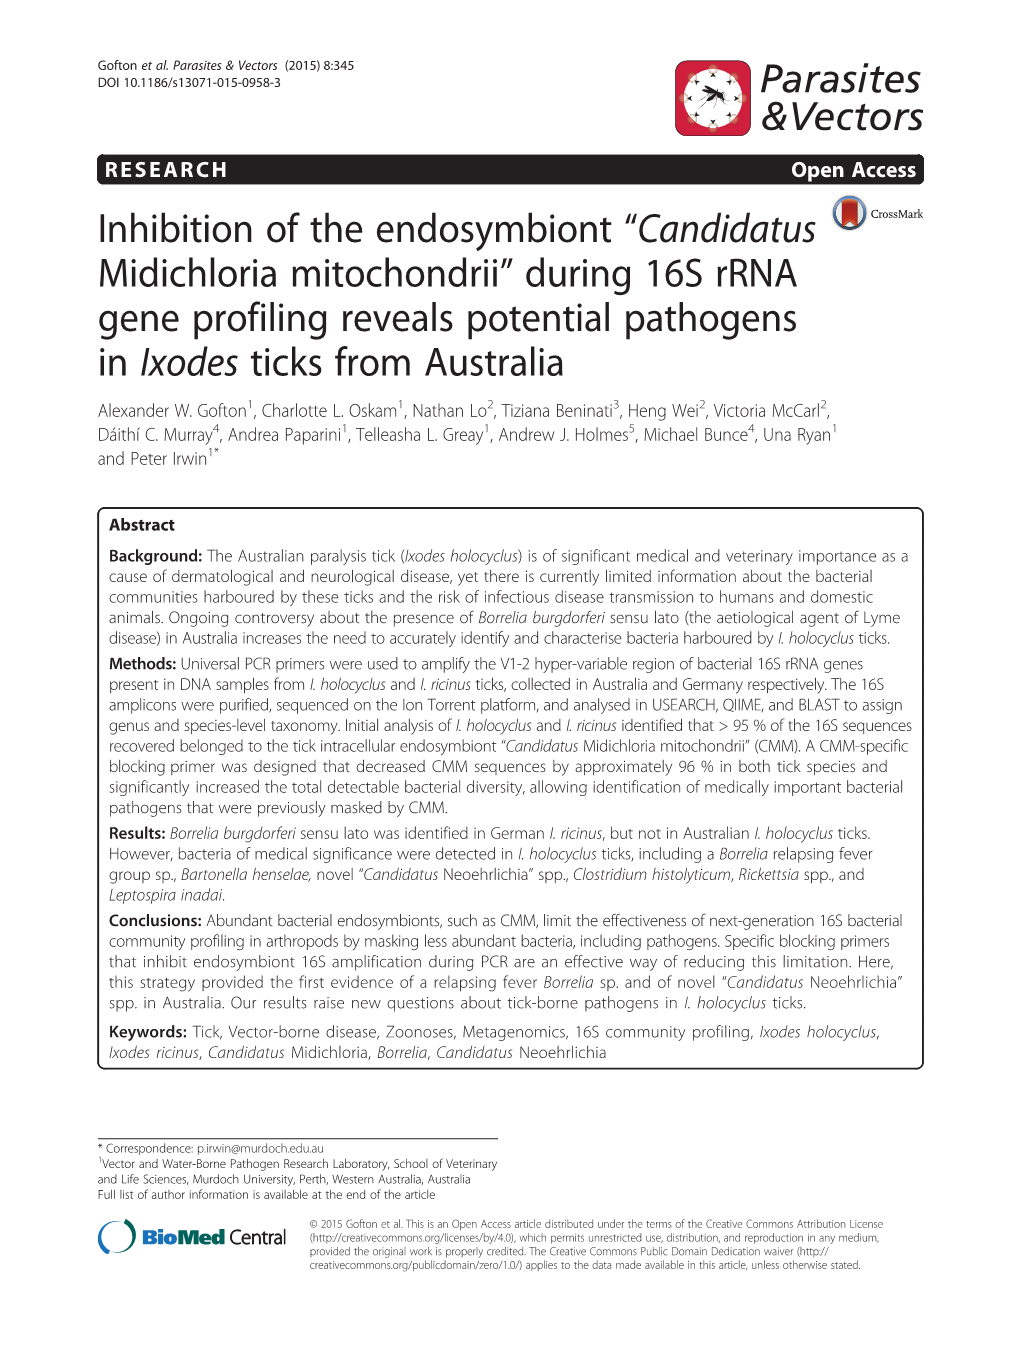 Candidatus Midichloria Mitochondrii” During 16S Rrna Gene Profiling Reveals Potential Pathogens in Ixodes Ticks from Australia Alexander W